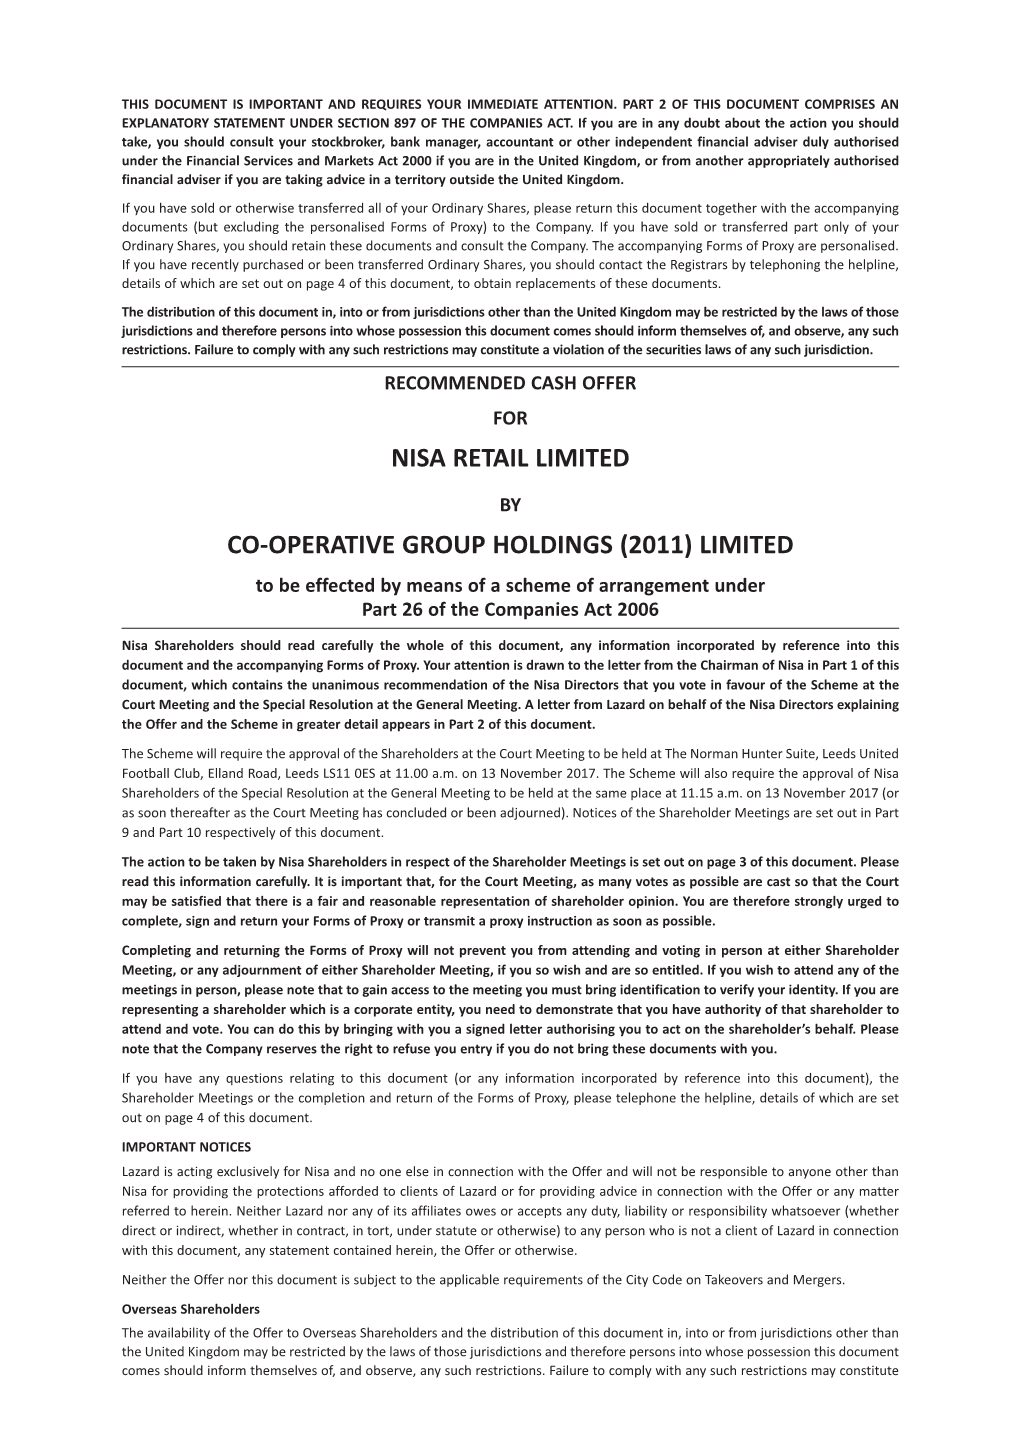 Nisa Retail Limited Cooperative Group Holdings